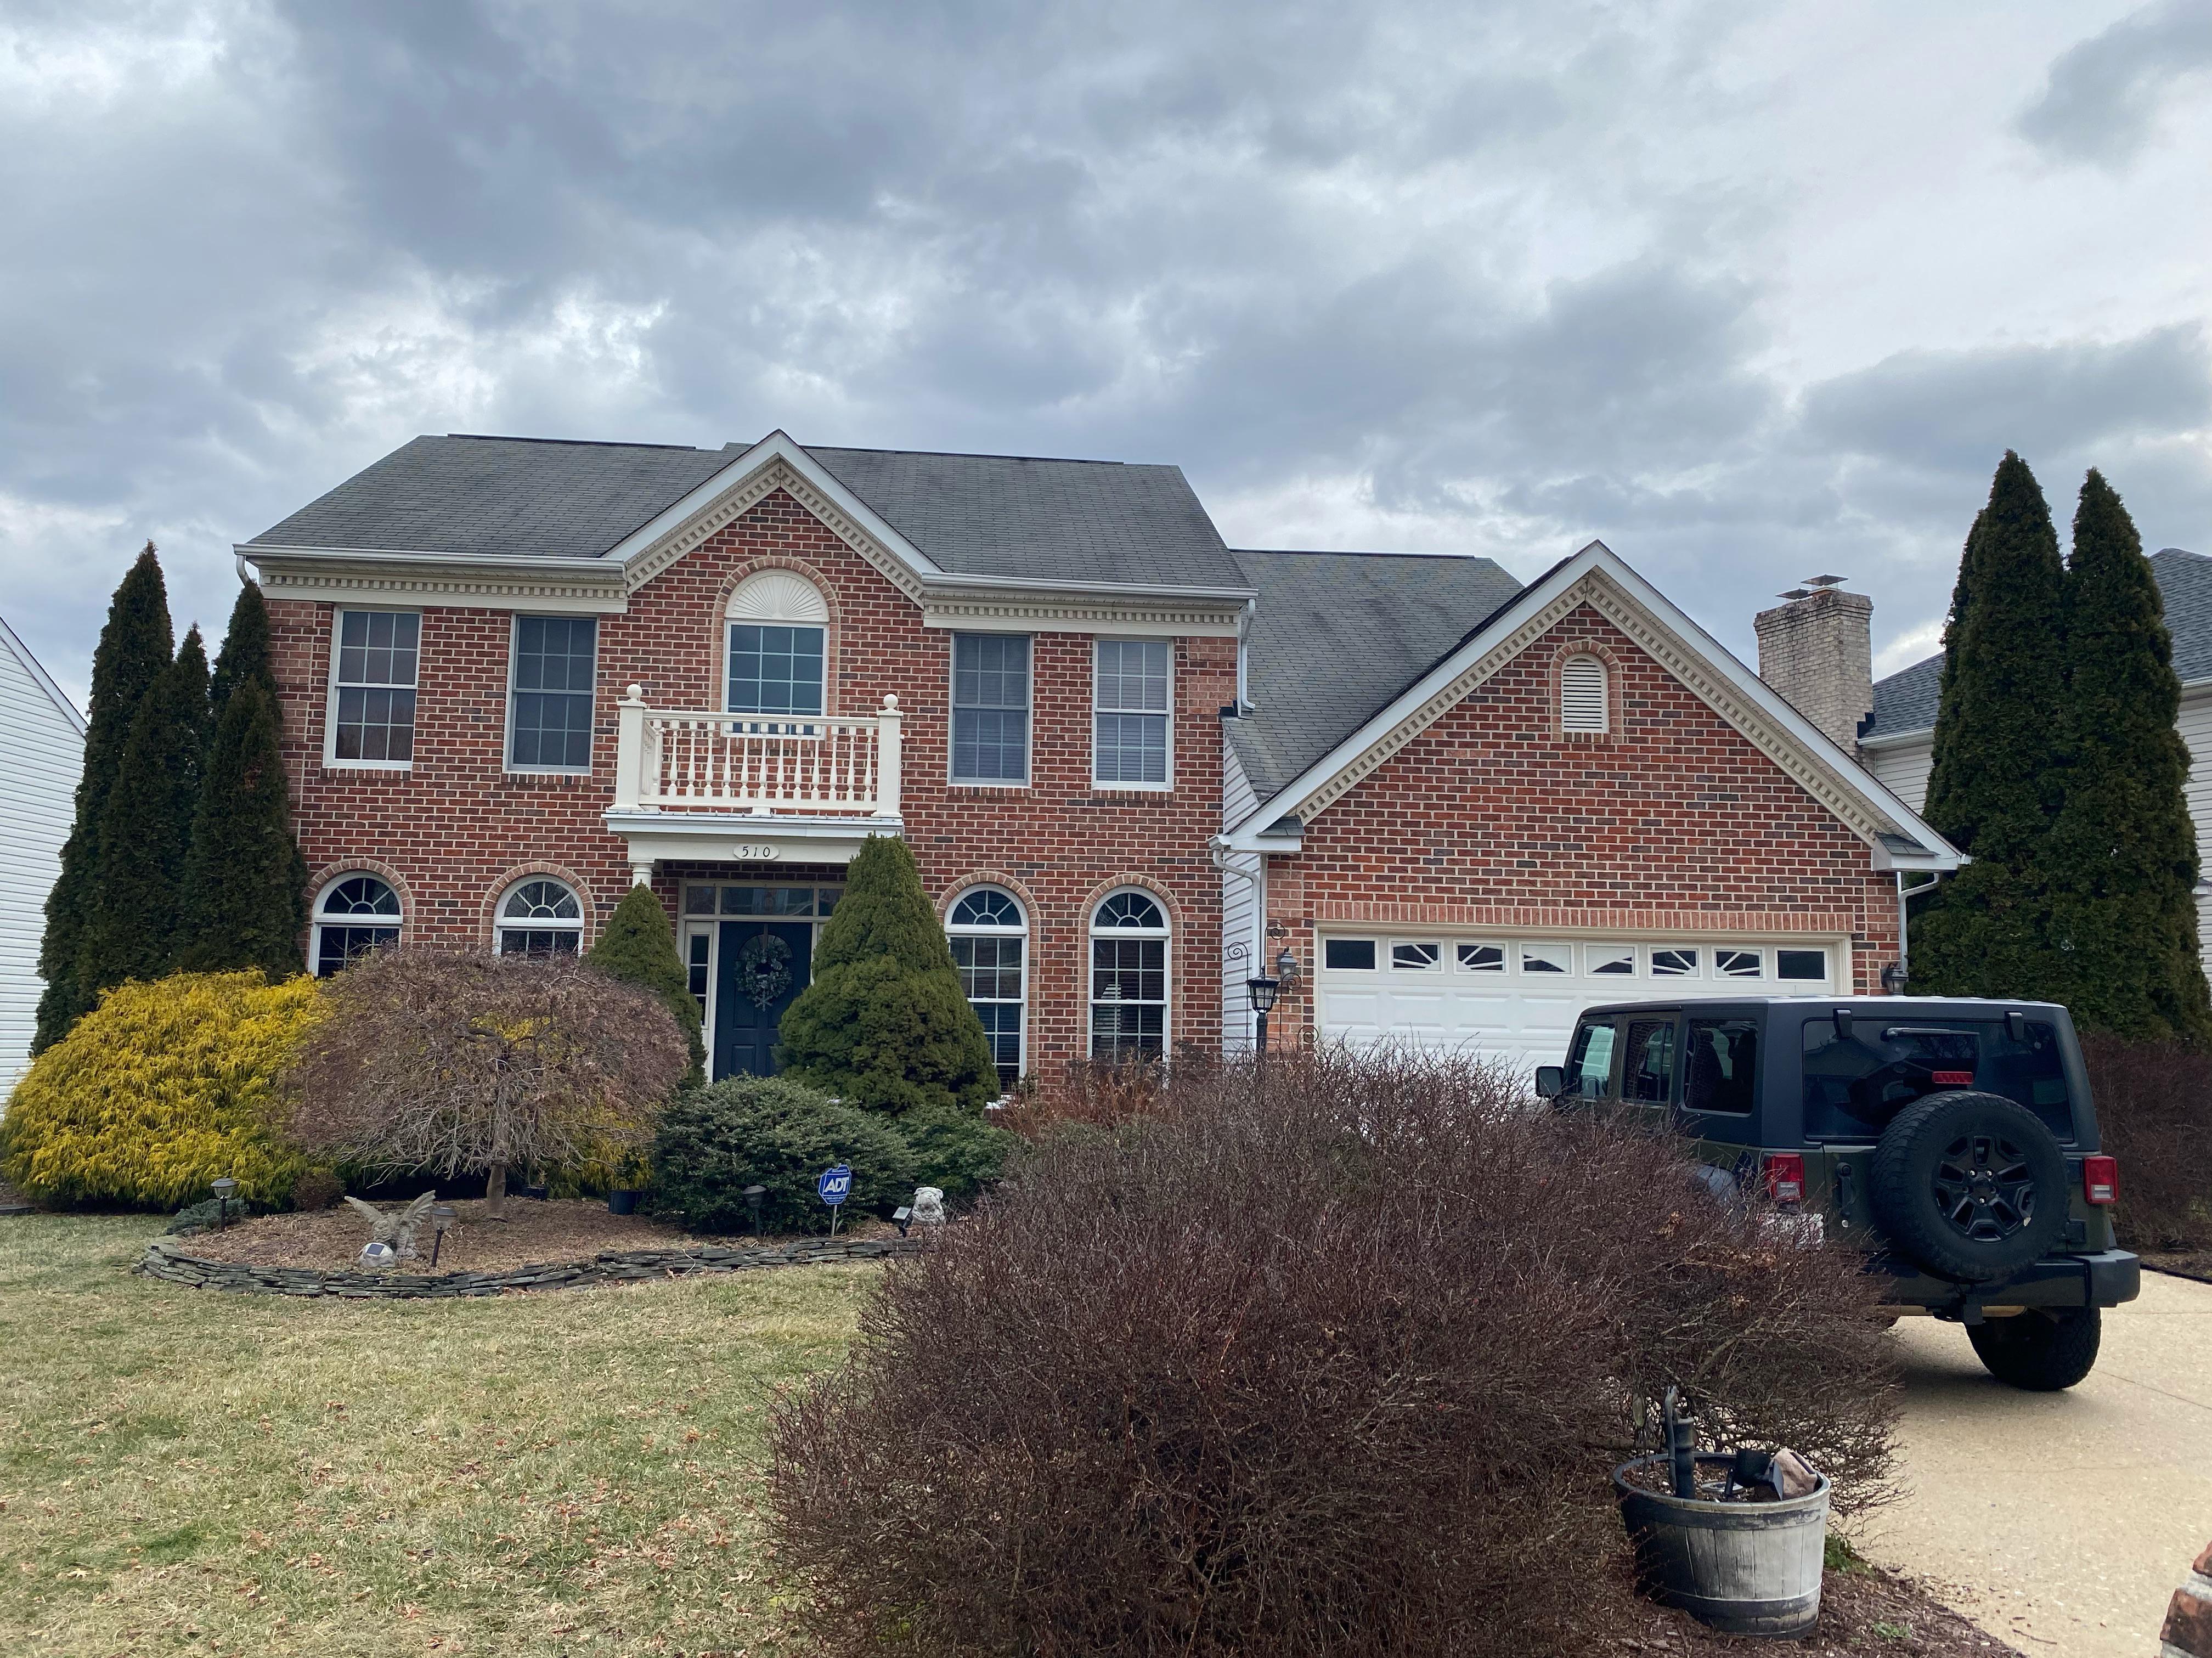 Free Roof Inspections all over Maryland!